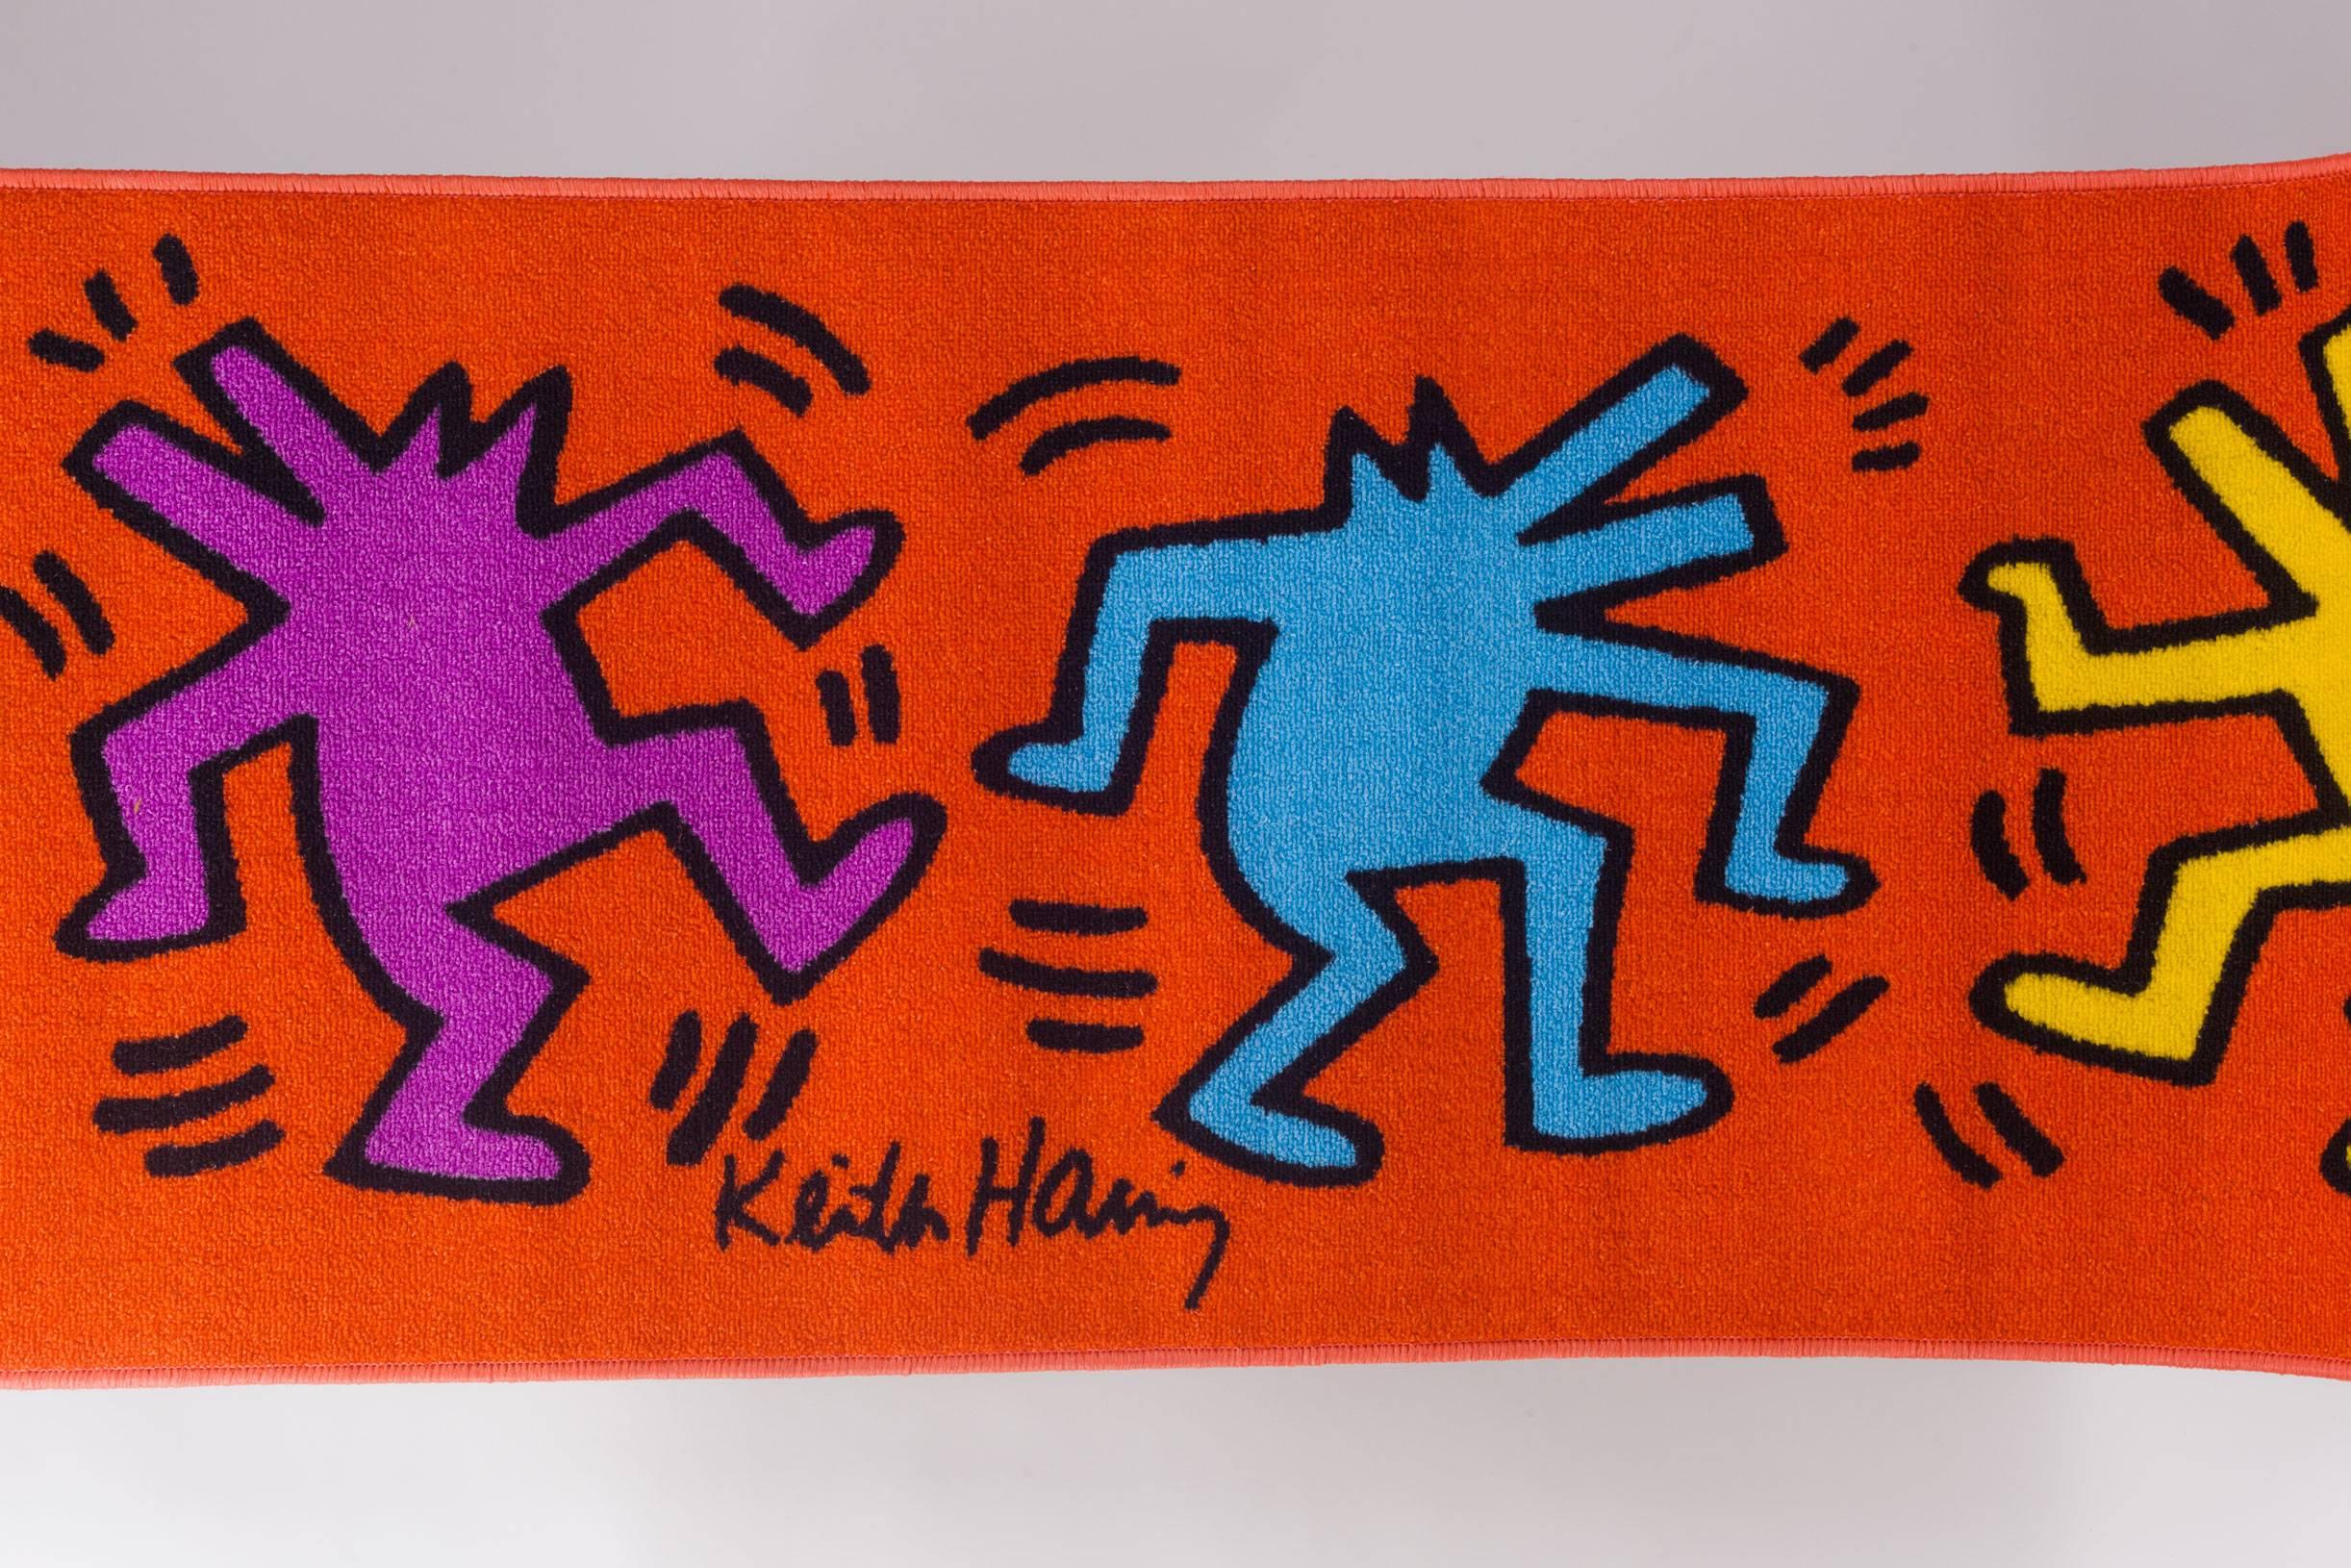 Brilliant colors in this Keith Haring runner with dancing figures, distributed by Comart Italia. Copyright Keith Haring Foundation, licensed by Artestar, New York. New old stock in packaging. Perfect addition to the home of anyone who admires the